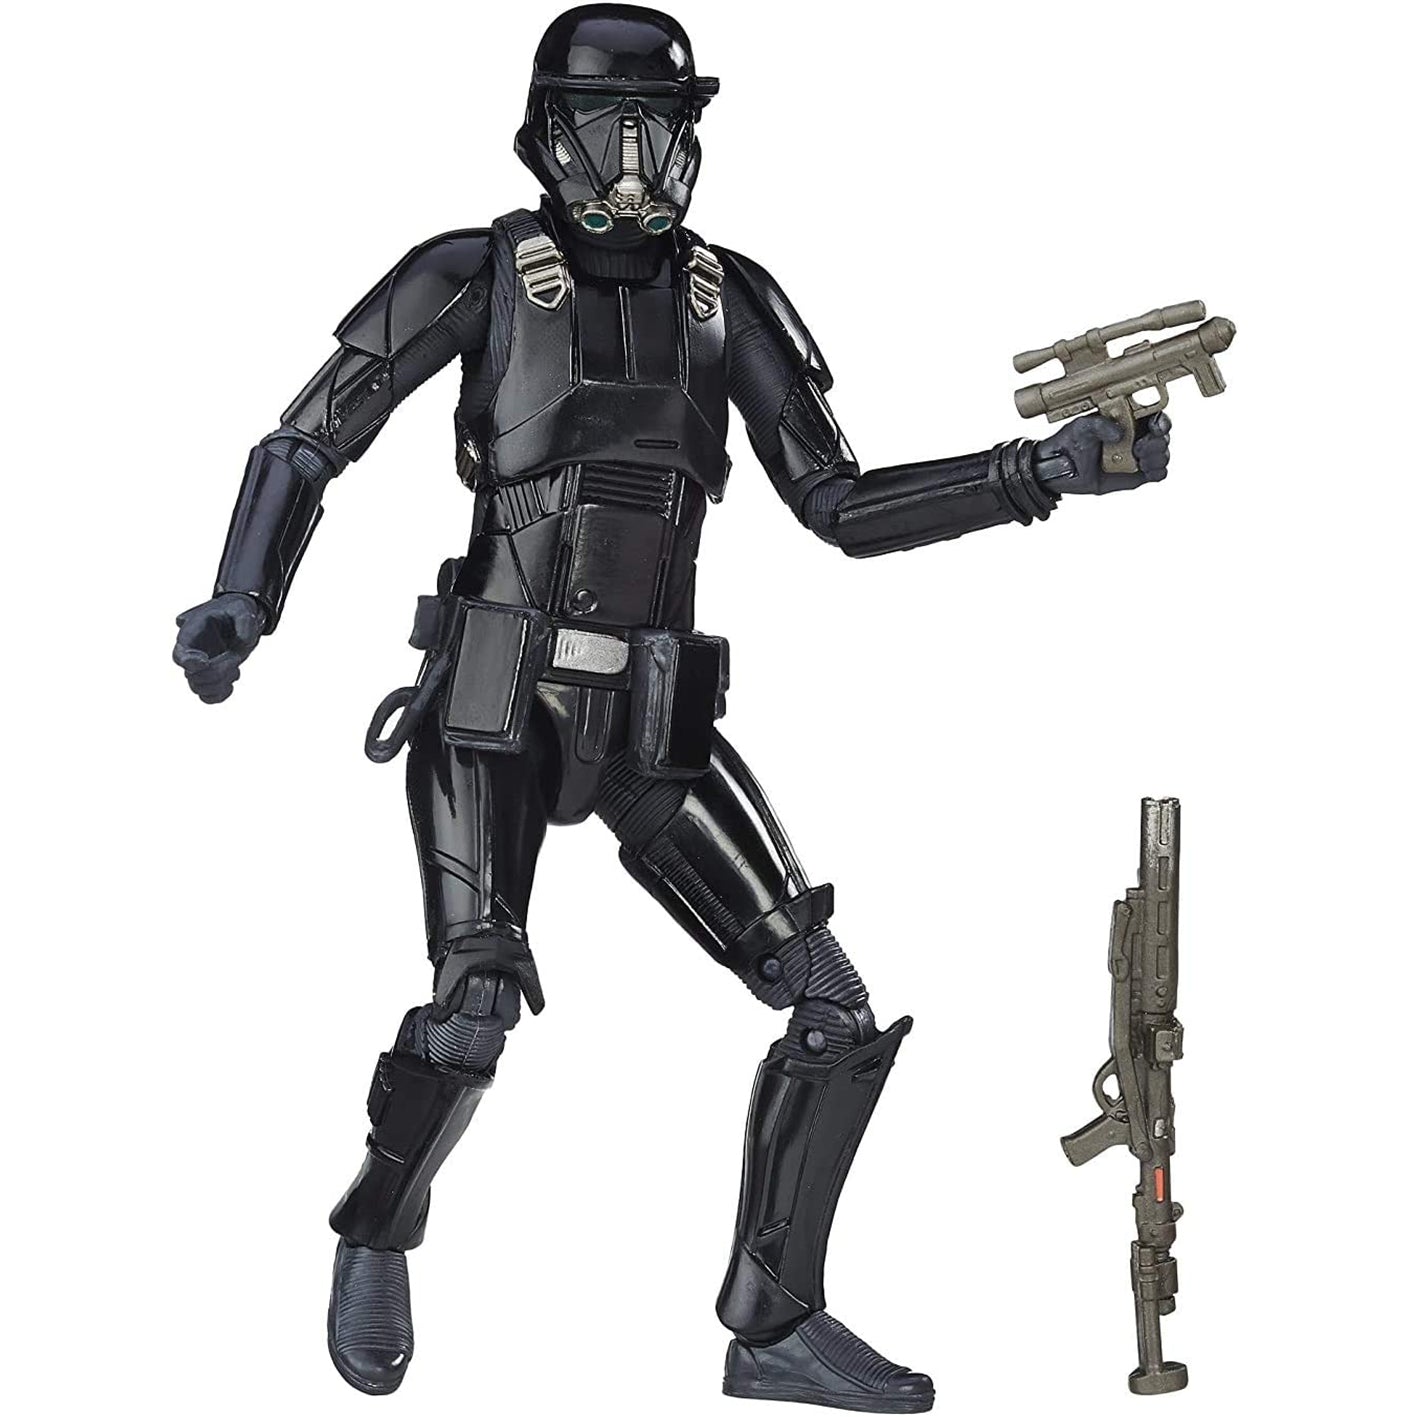 Imperial Death Trooper Archive, Star Wars The Black Series